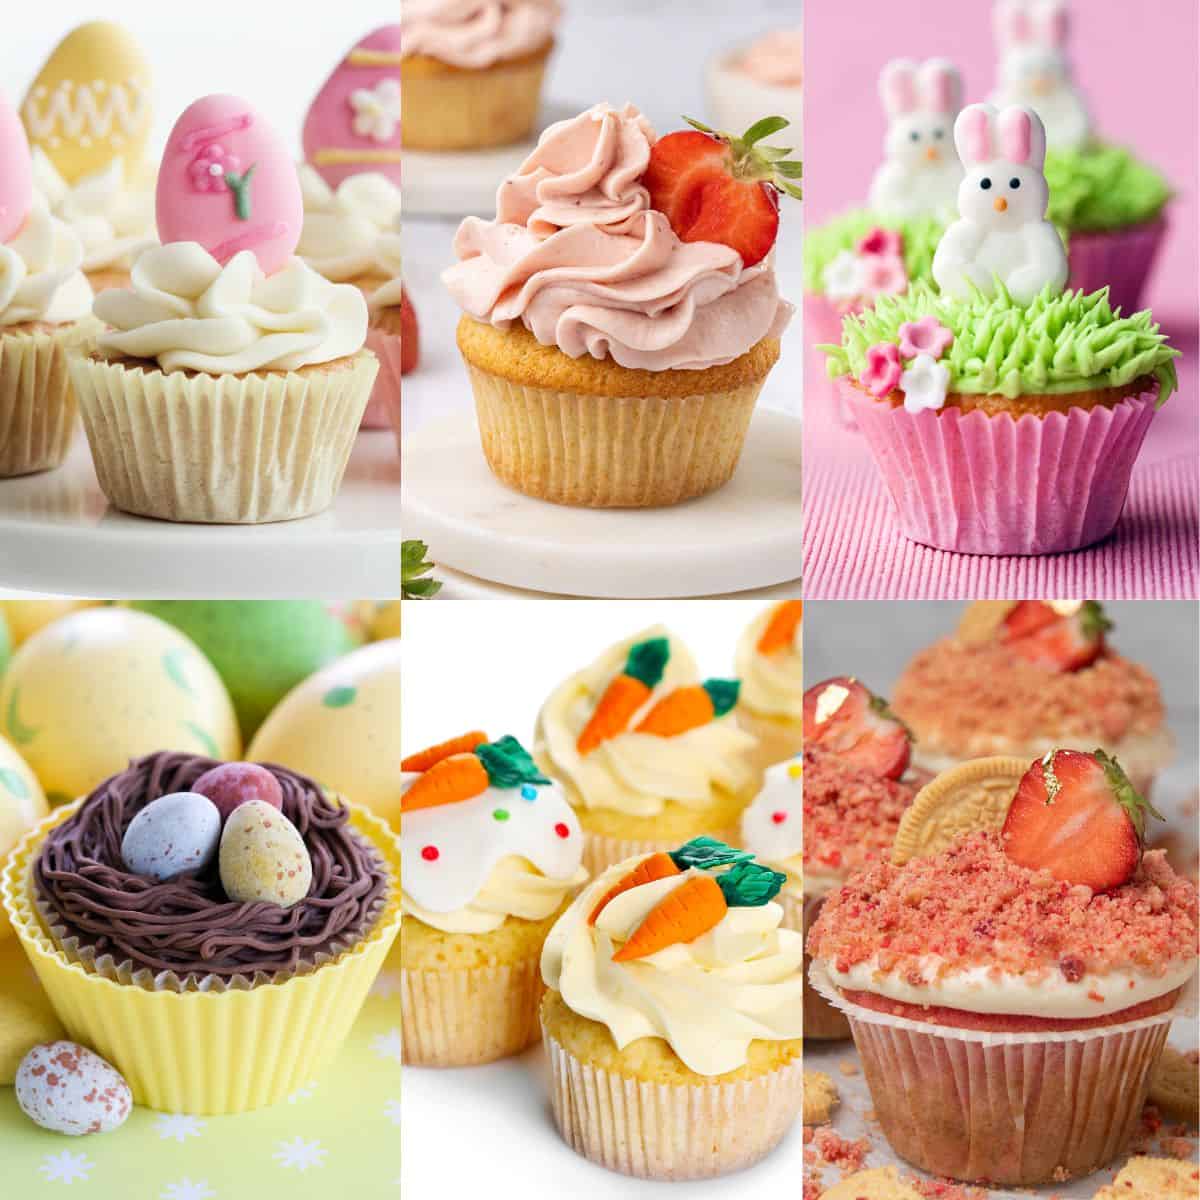 <p>Are you looking for some great ideas for <a href="https://www.spatuladesserts.com/easter-cupcakes/">Easter cupcakes?</a> Well, you have come to the right place! I am in love with these 35 amazing Easter cupcake recipes. Each one is perfect for the spring and a great addition to any Easter table. From bright, bold lemon cupcakes to fluffy but rich chocolate cupcakes, I know you will adore every one of these little, sweet cakes. Every bunny will love these Easter cupcake recipes!!</p><p><strong>Go to the recipe</strong>: <strong><a href="https://www.spatuladesserts.com/easter-cupcakes/">Easter Cupcakes</a></strong></p>